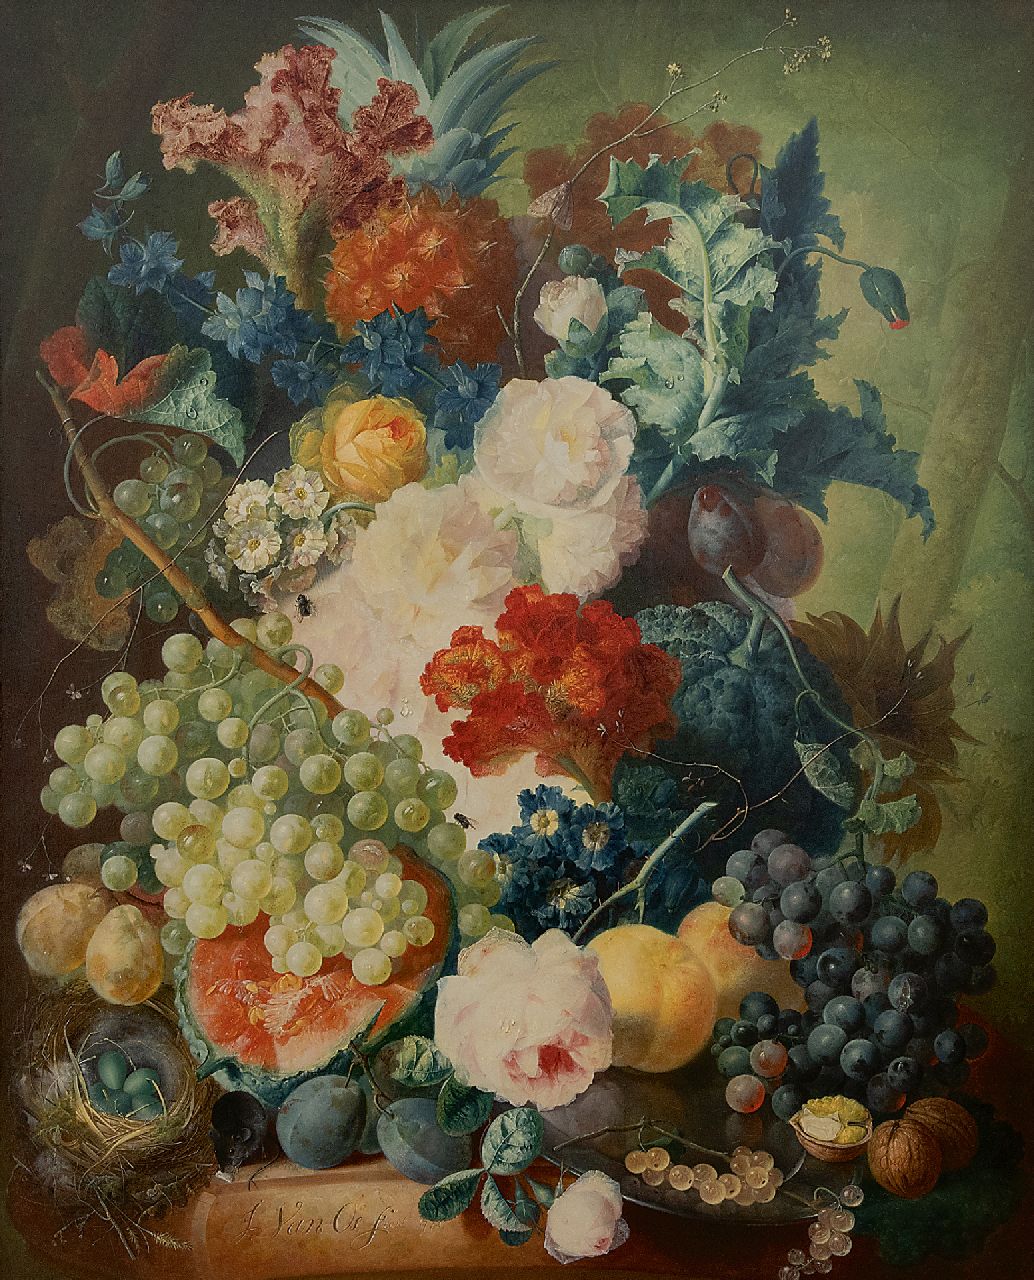 Os J. van | Jan van Os | Paintings offered for sale | Flower still life with fruit, a mouse and a bird's nest, oil on panel 69.7 x 55.1 cm, signed l.l. and dated 1774